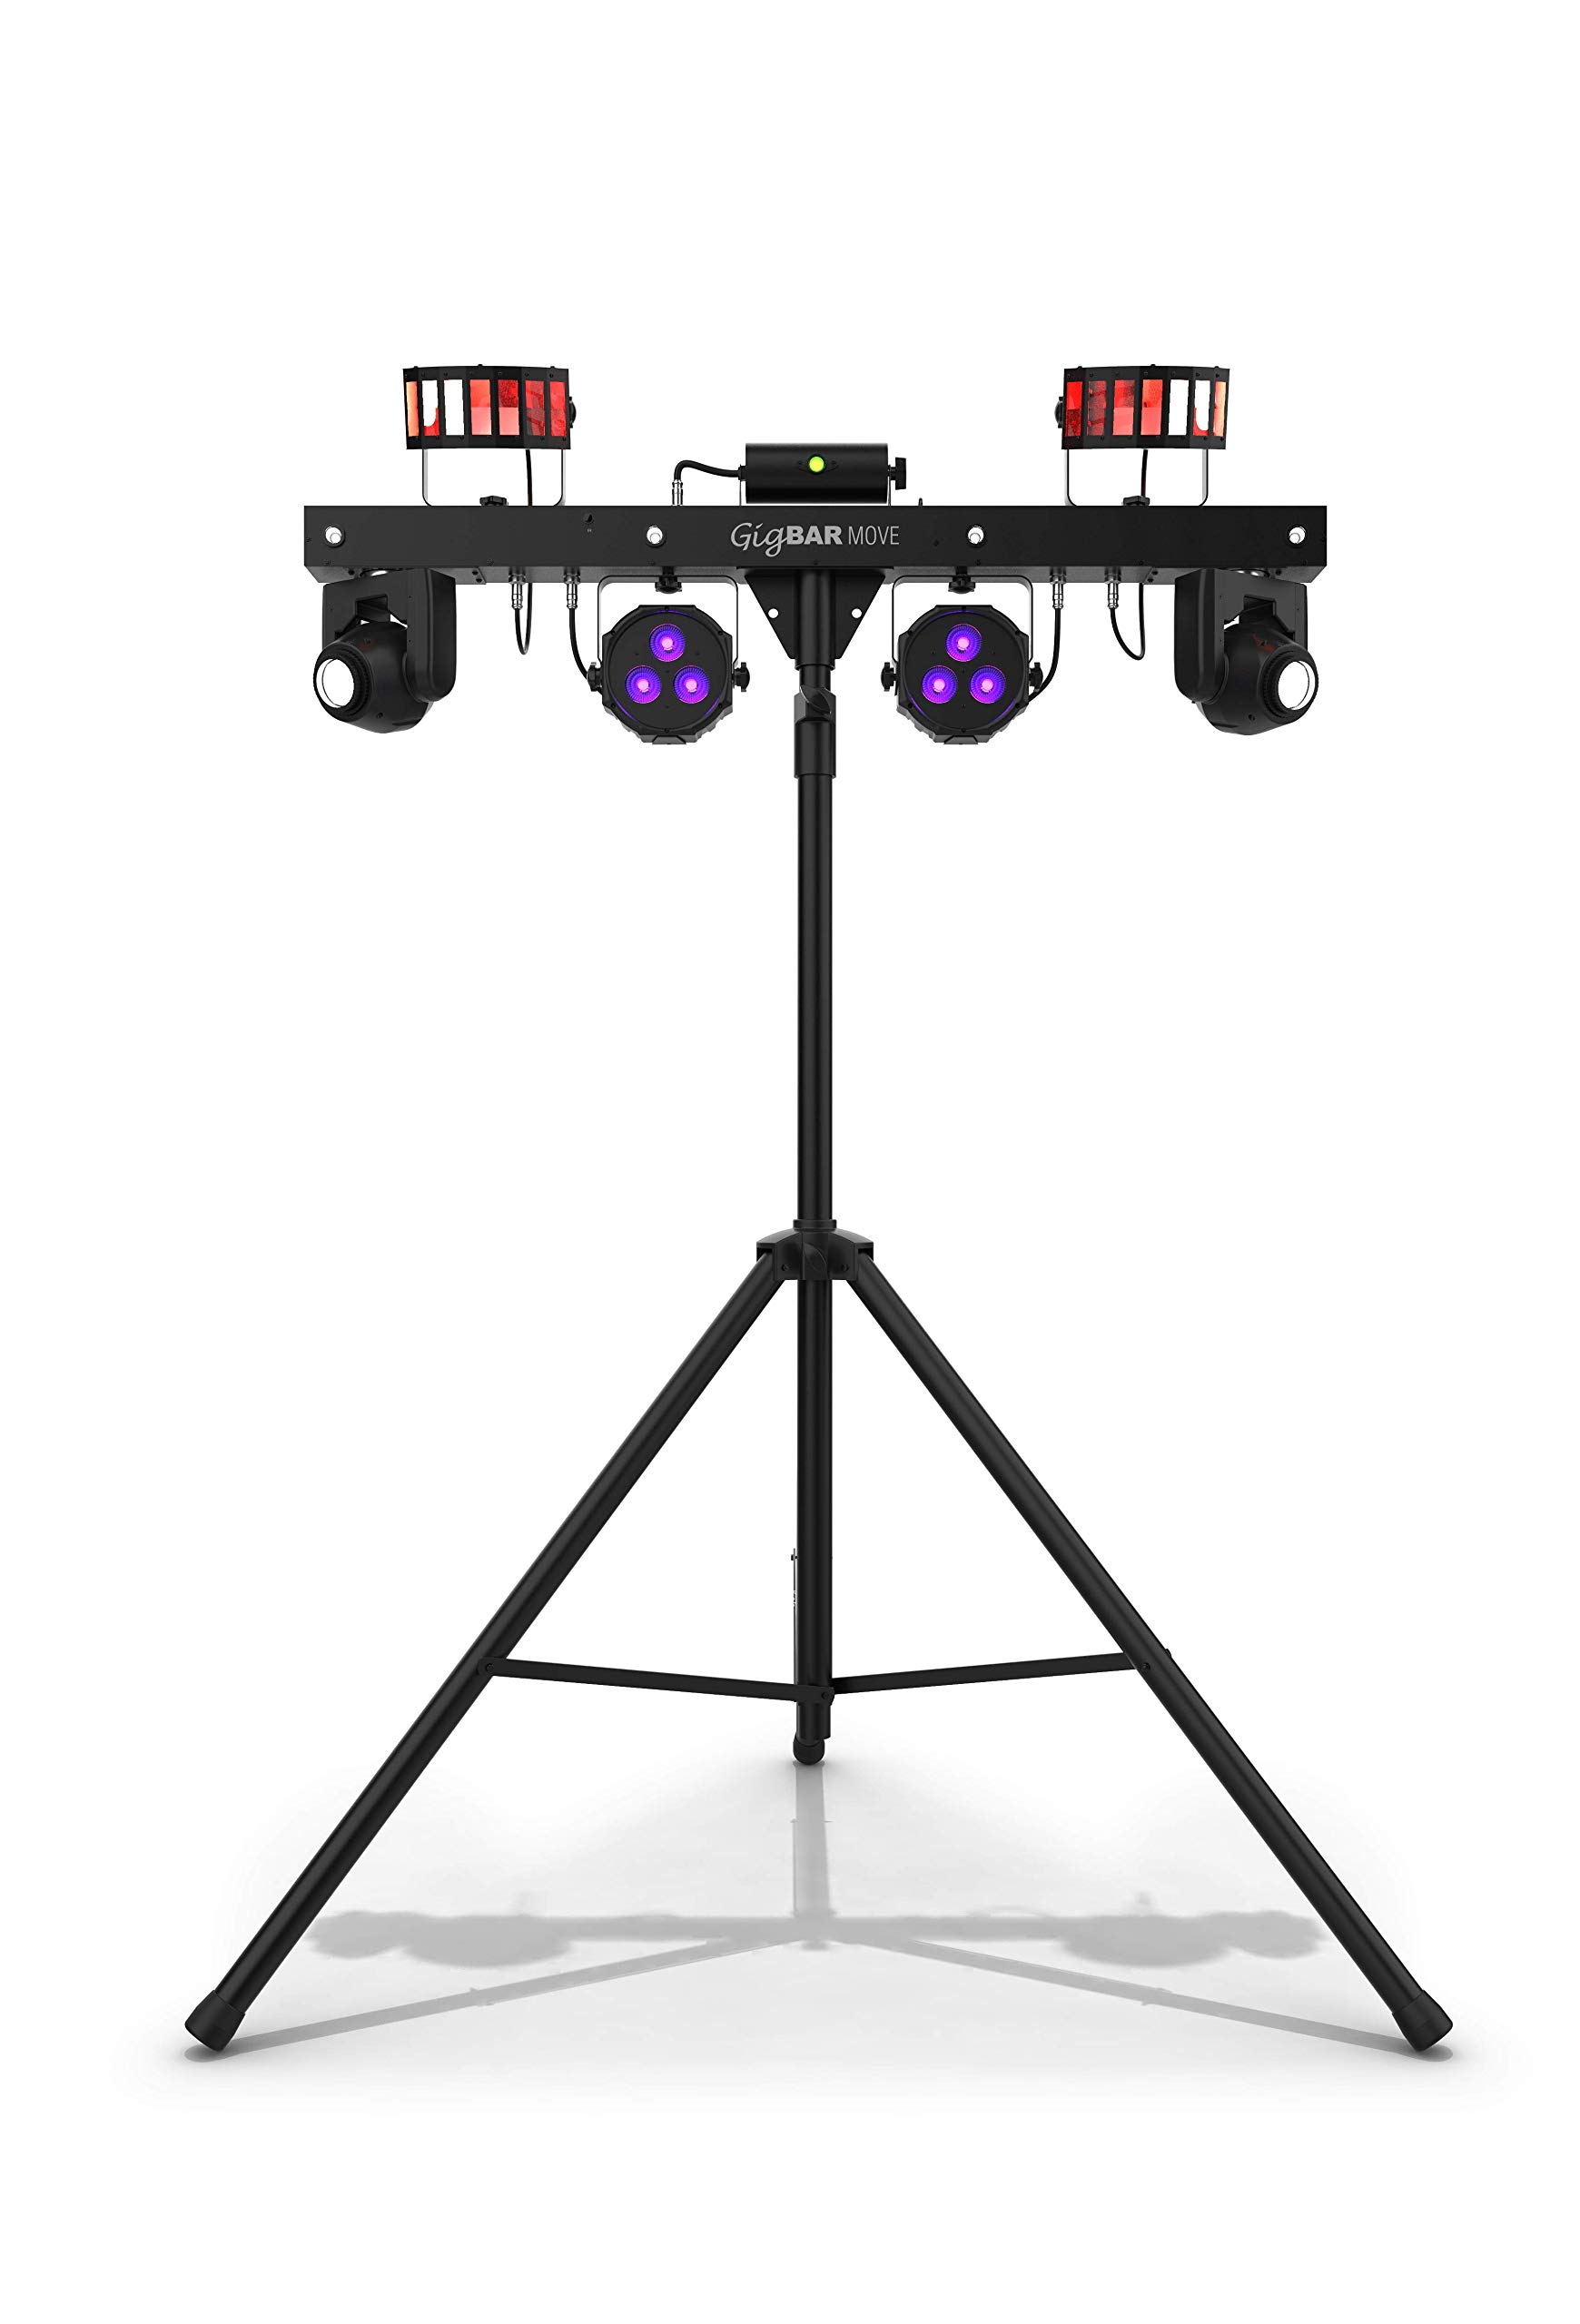 Chauvet DJ GigBAR MOVE 5-in-1 Lighting System with Wire...